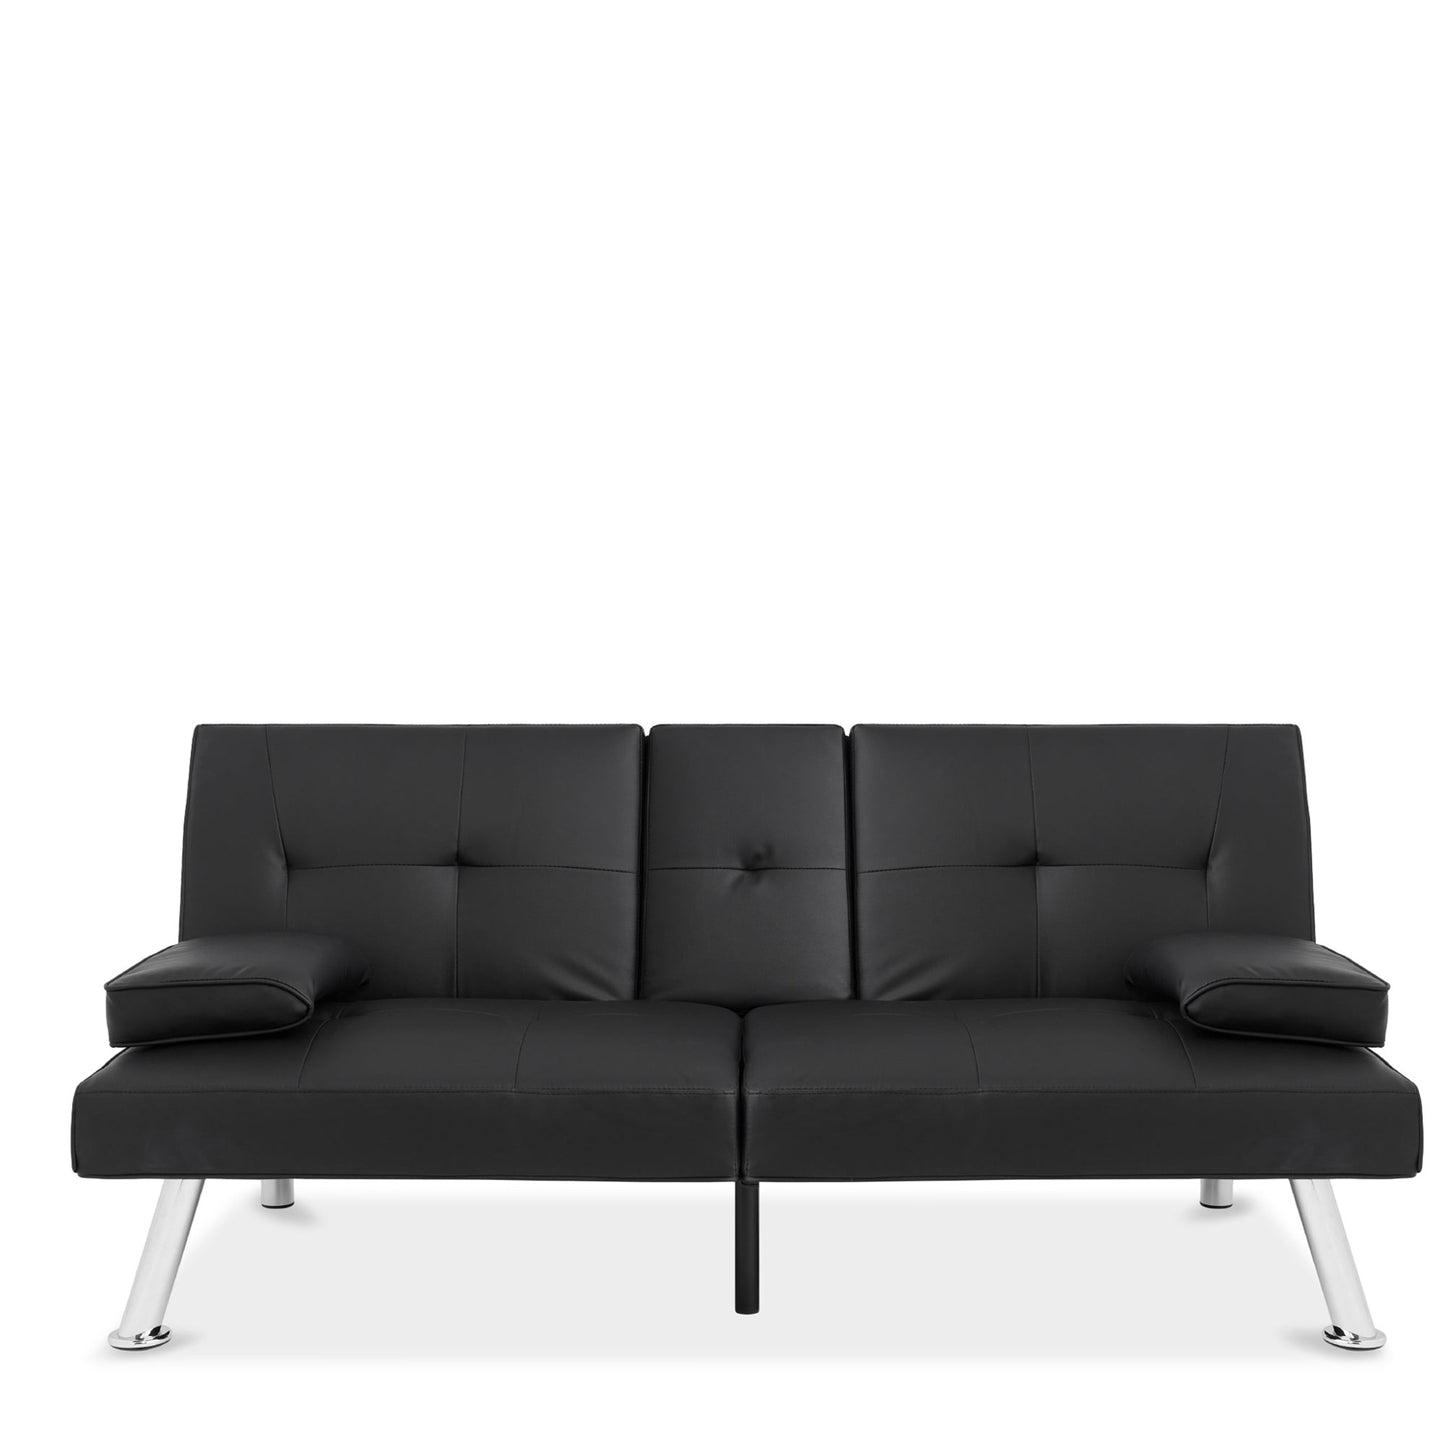 Black Faux Leather Convertible Sofa Futon with 2 Cup Holders